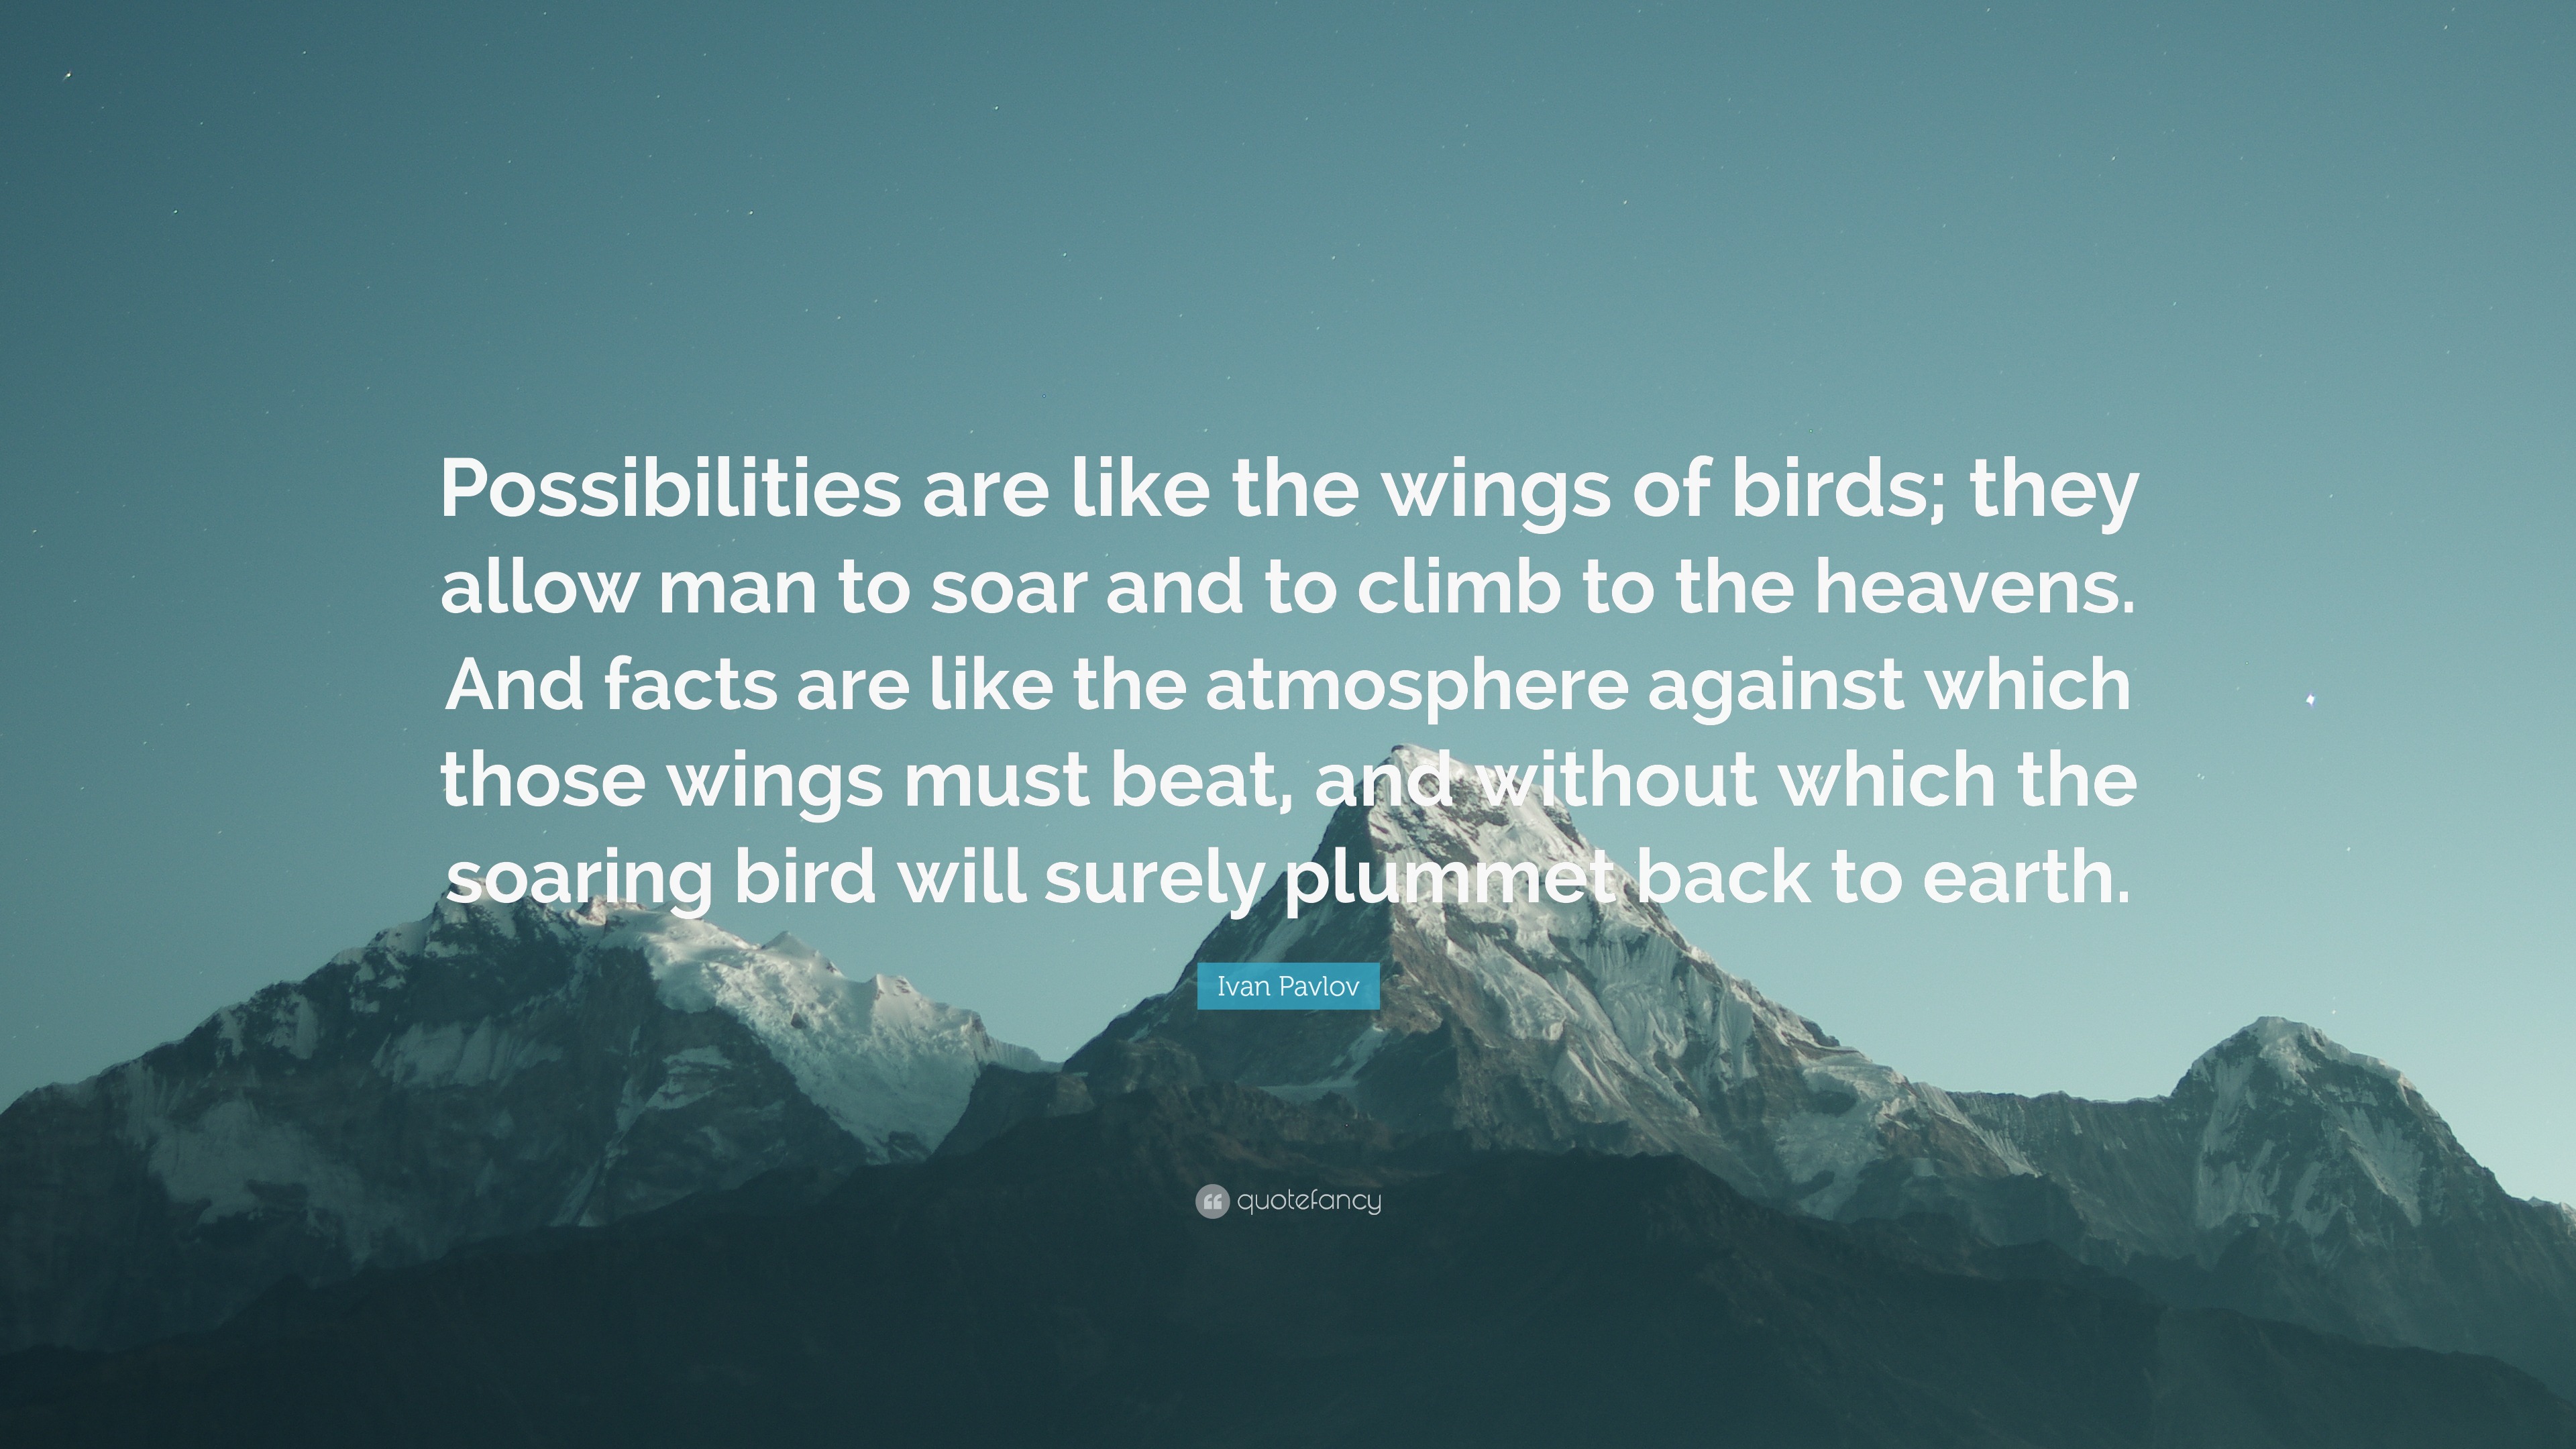 Ivan Pavlov Quote: “Possibilities are like the wings of birds; they ...